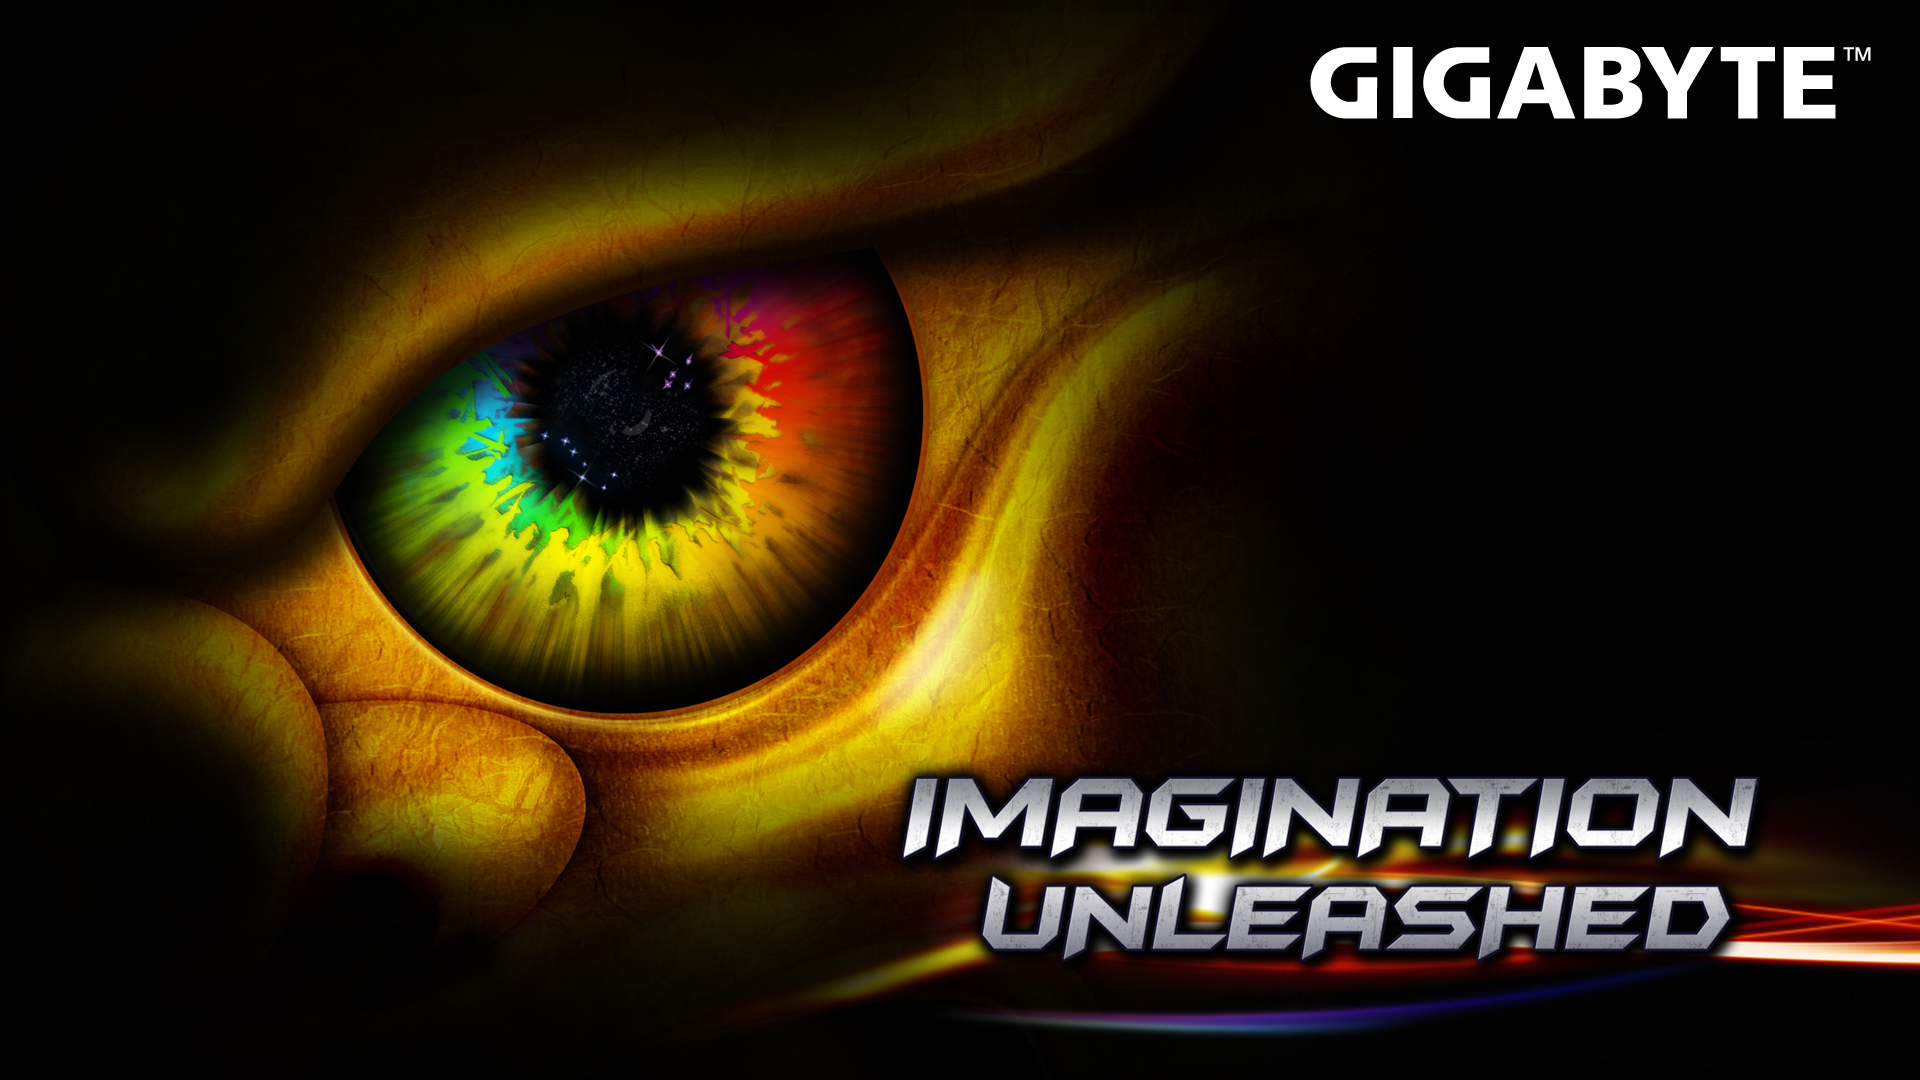 gigabyte face wizard images